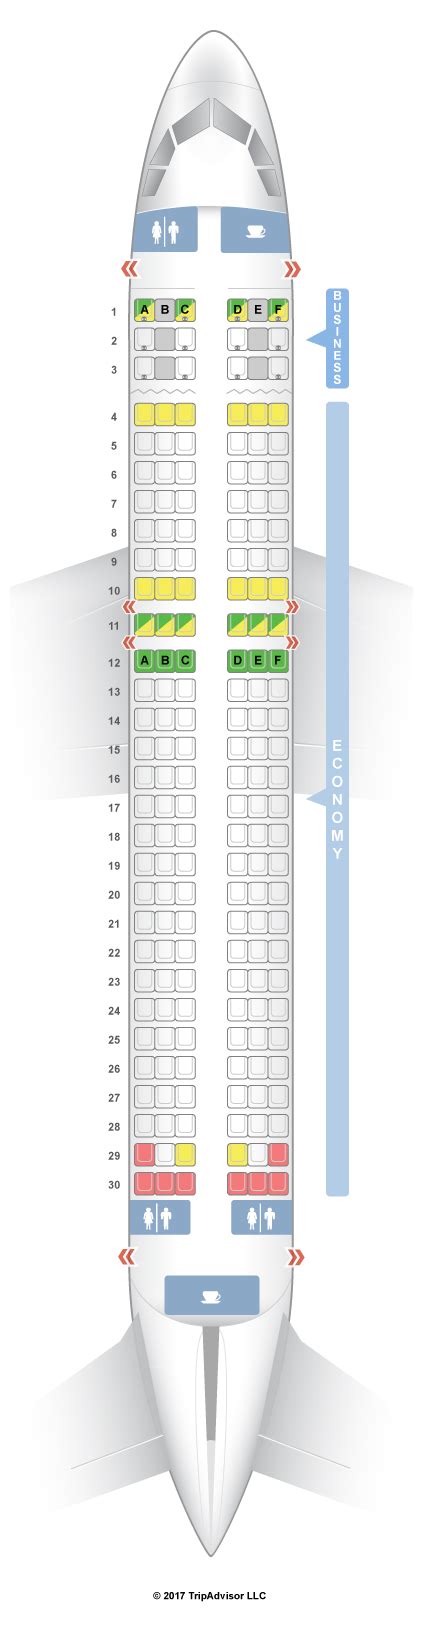 Brussels Airlines Airbus A330 300 Seat Map